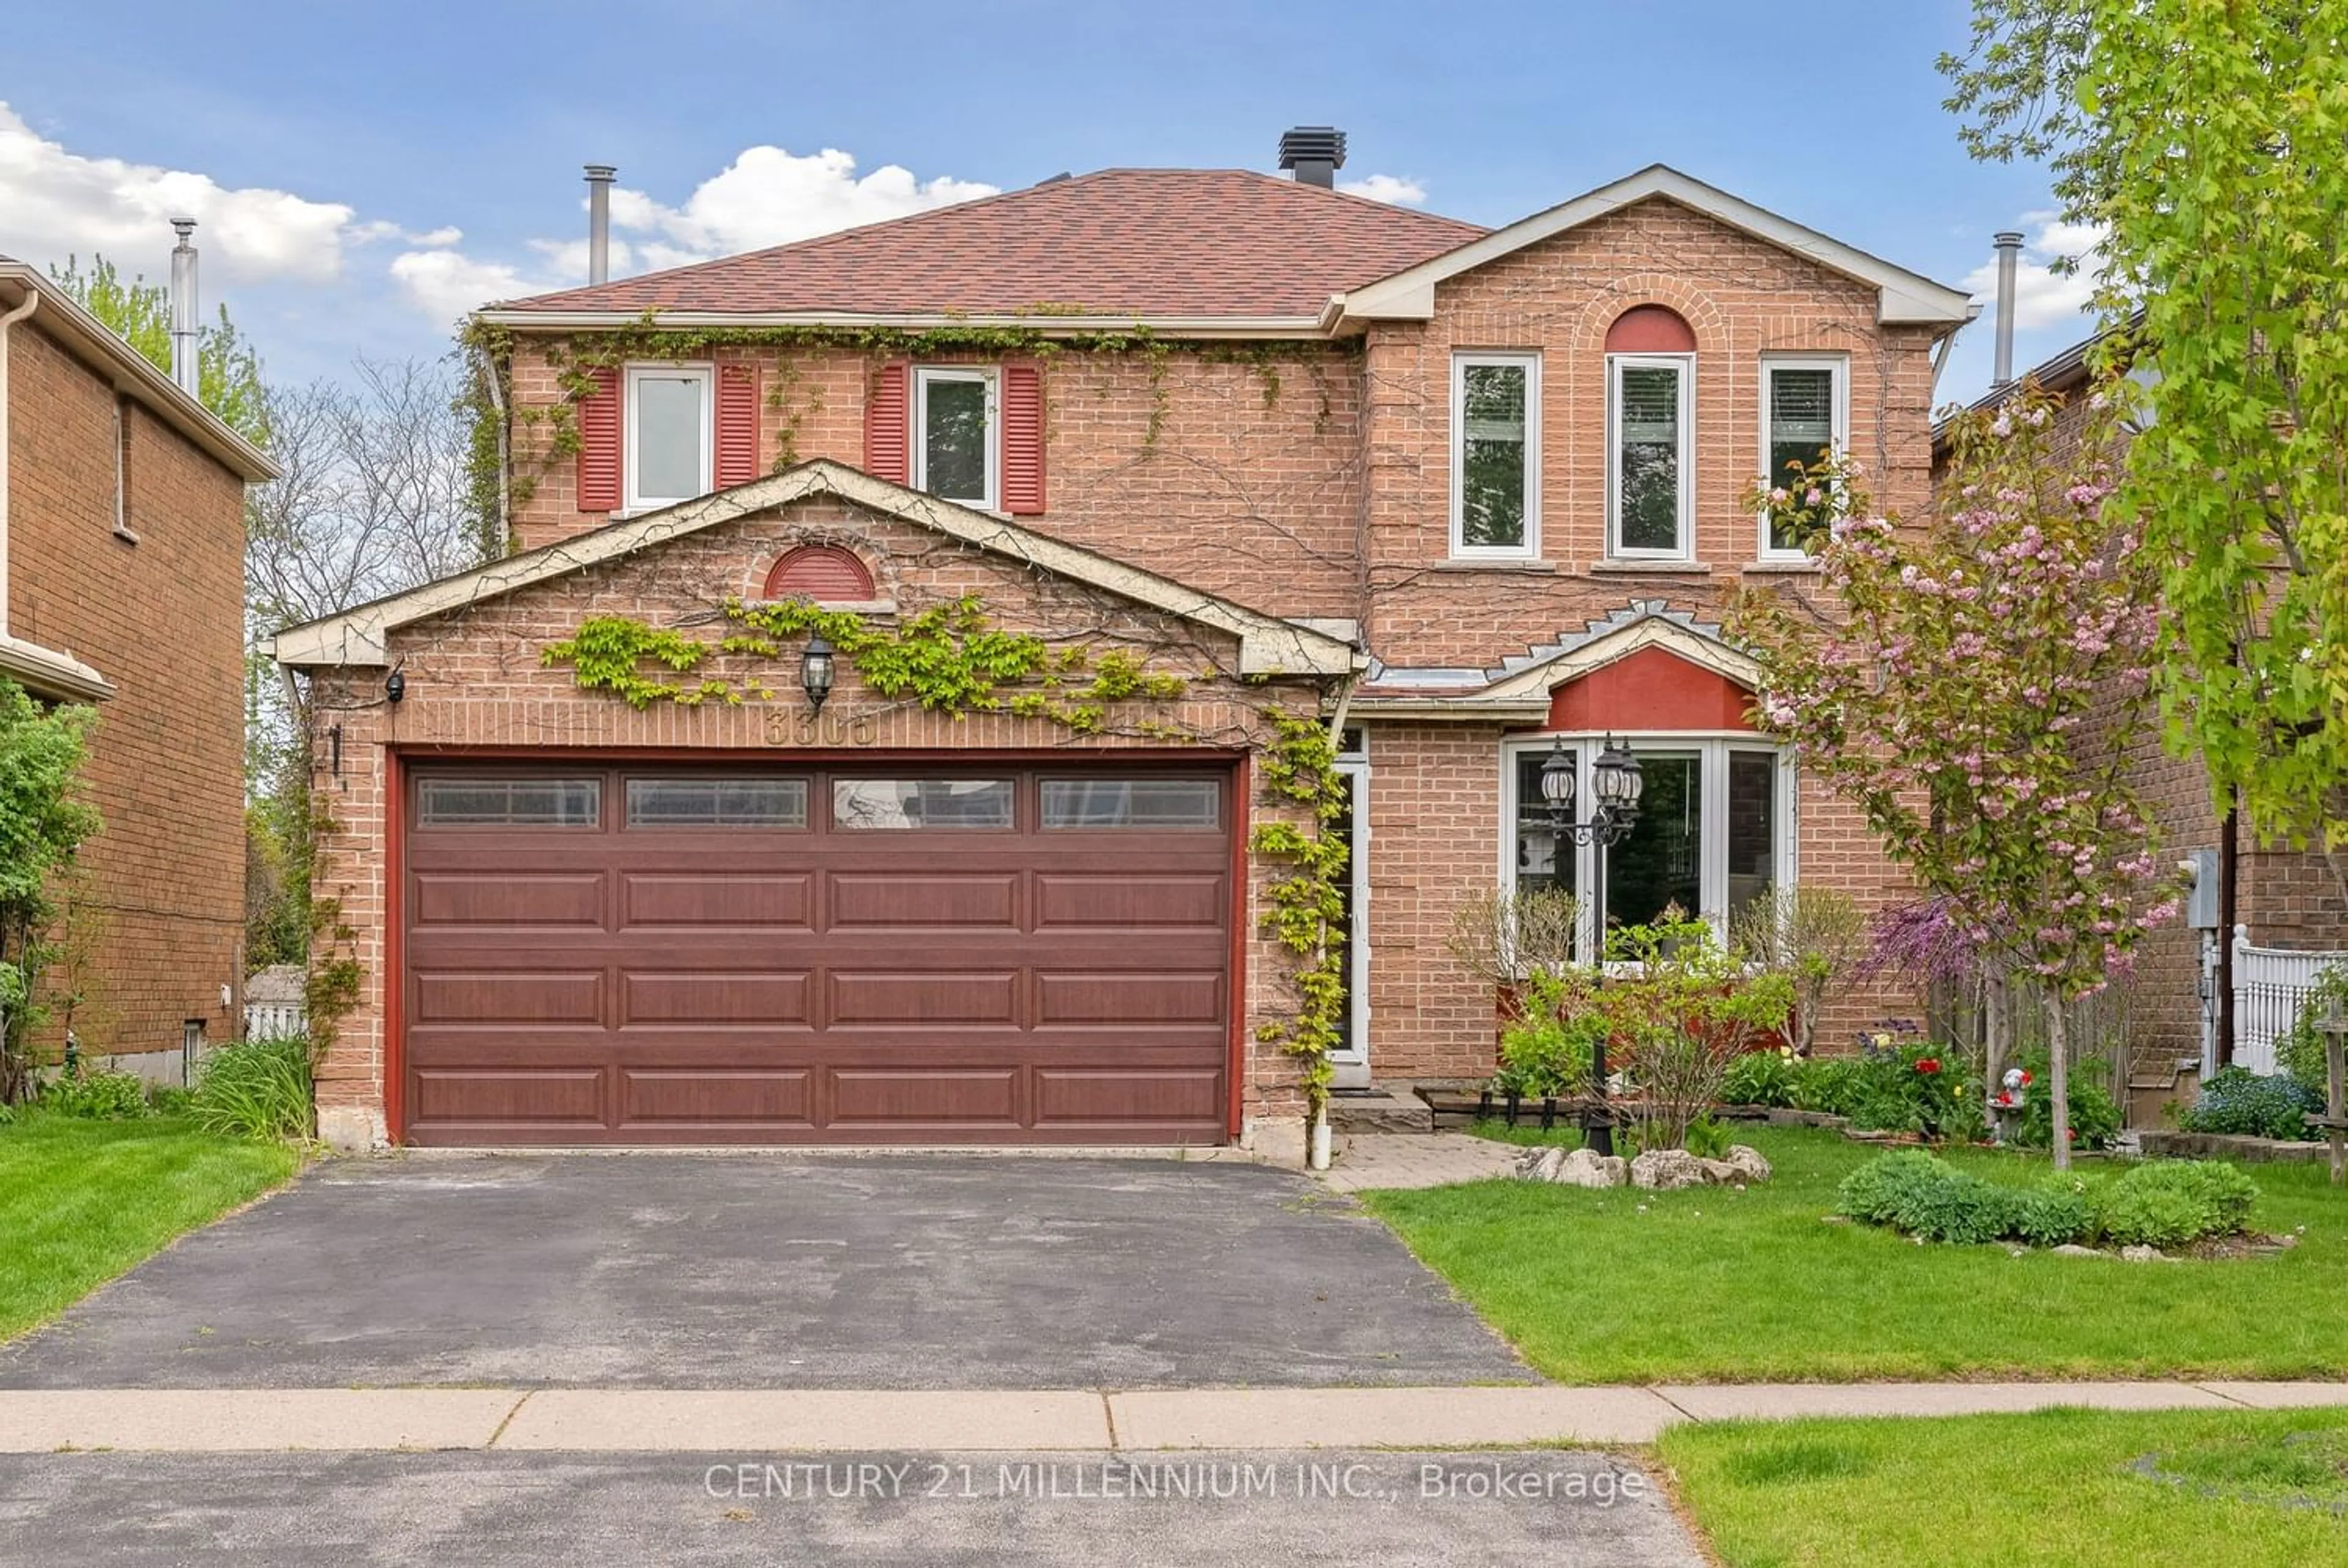 Home with brick exterior material for 3305 Jackpine Rd, Mississauga Ontario L5L 4P3